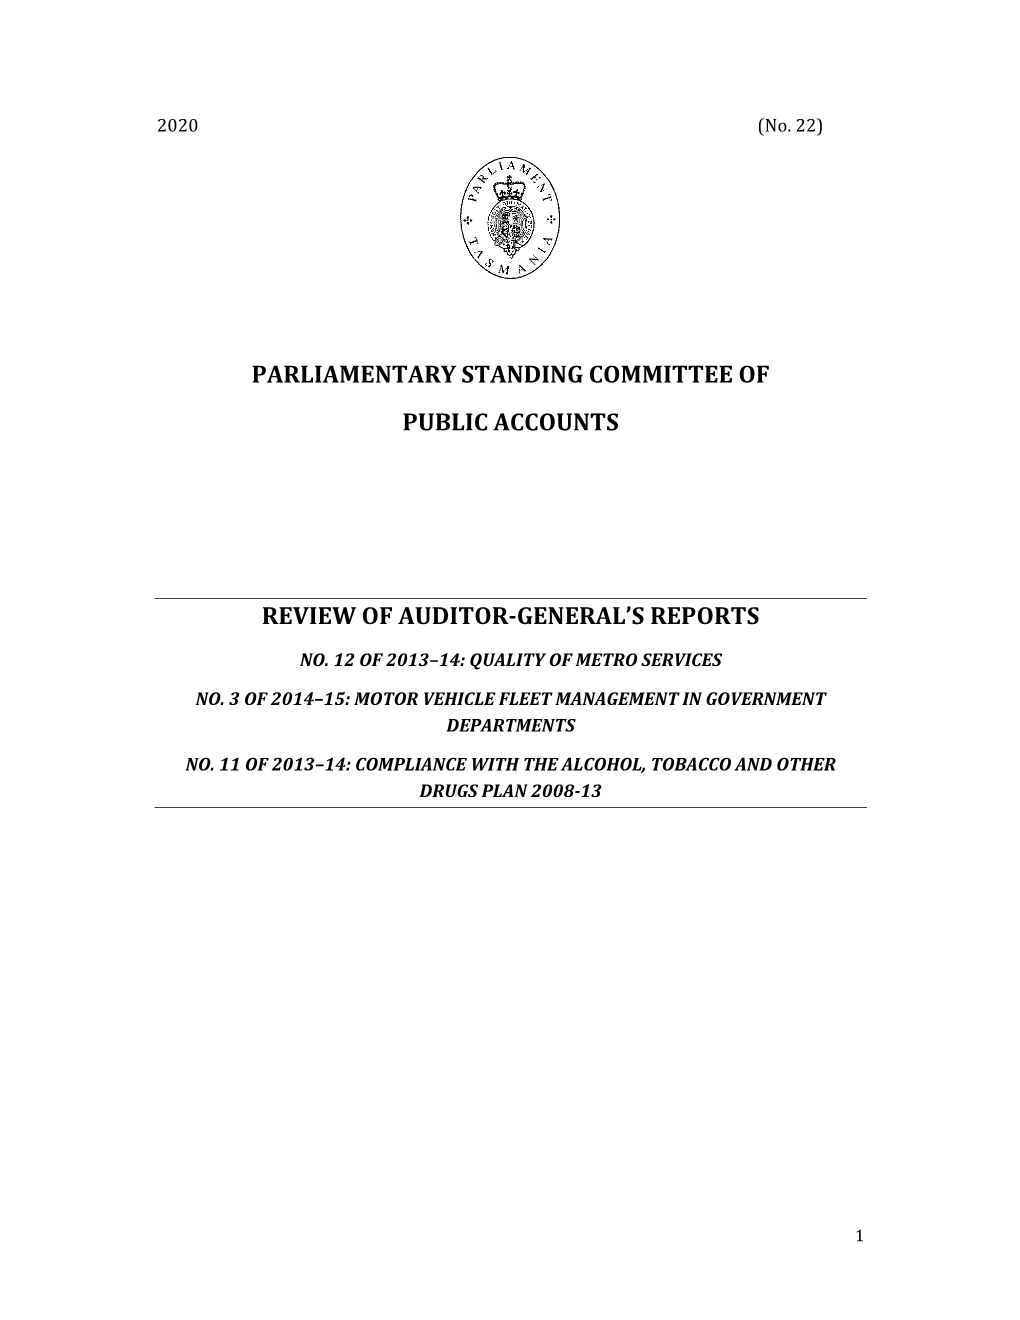 Parliamentary Standing Committee of Public Accounts